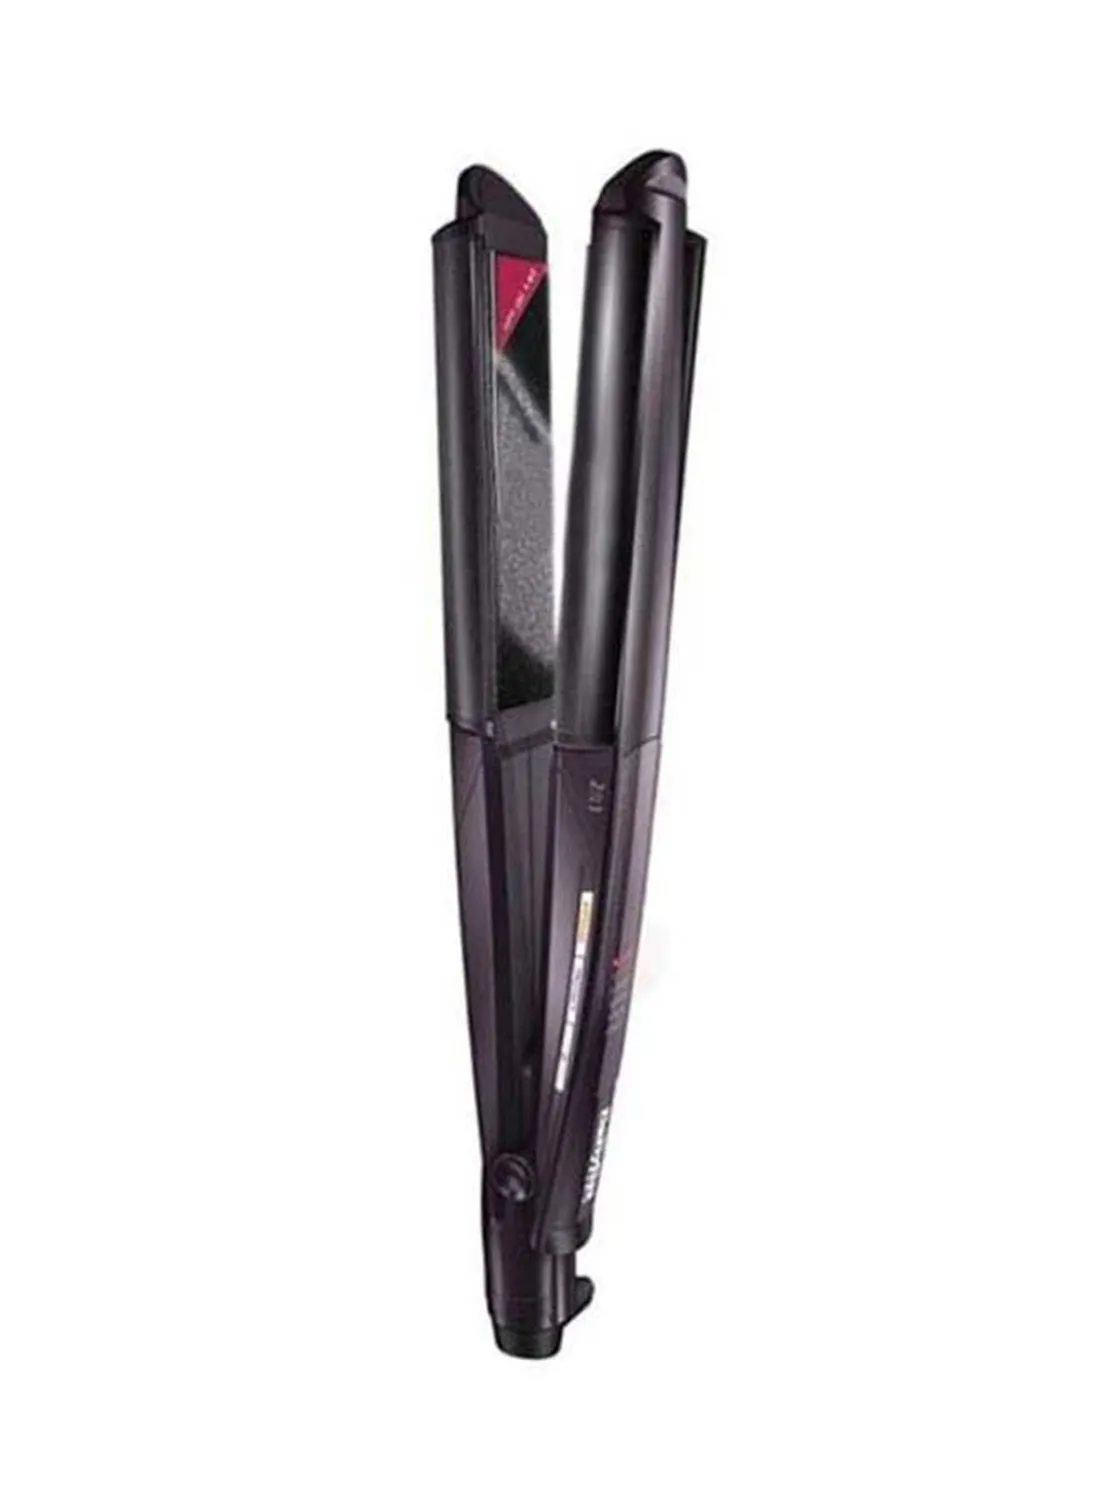 babyliss Hair Straightener wet & Dry Straight | Dual-function Straightening And Curling | Advanced Heat Technology With Quick Heat-up Time | Long-lasting Results & Salon-quality Styling | ST330SDE Black